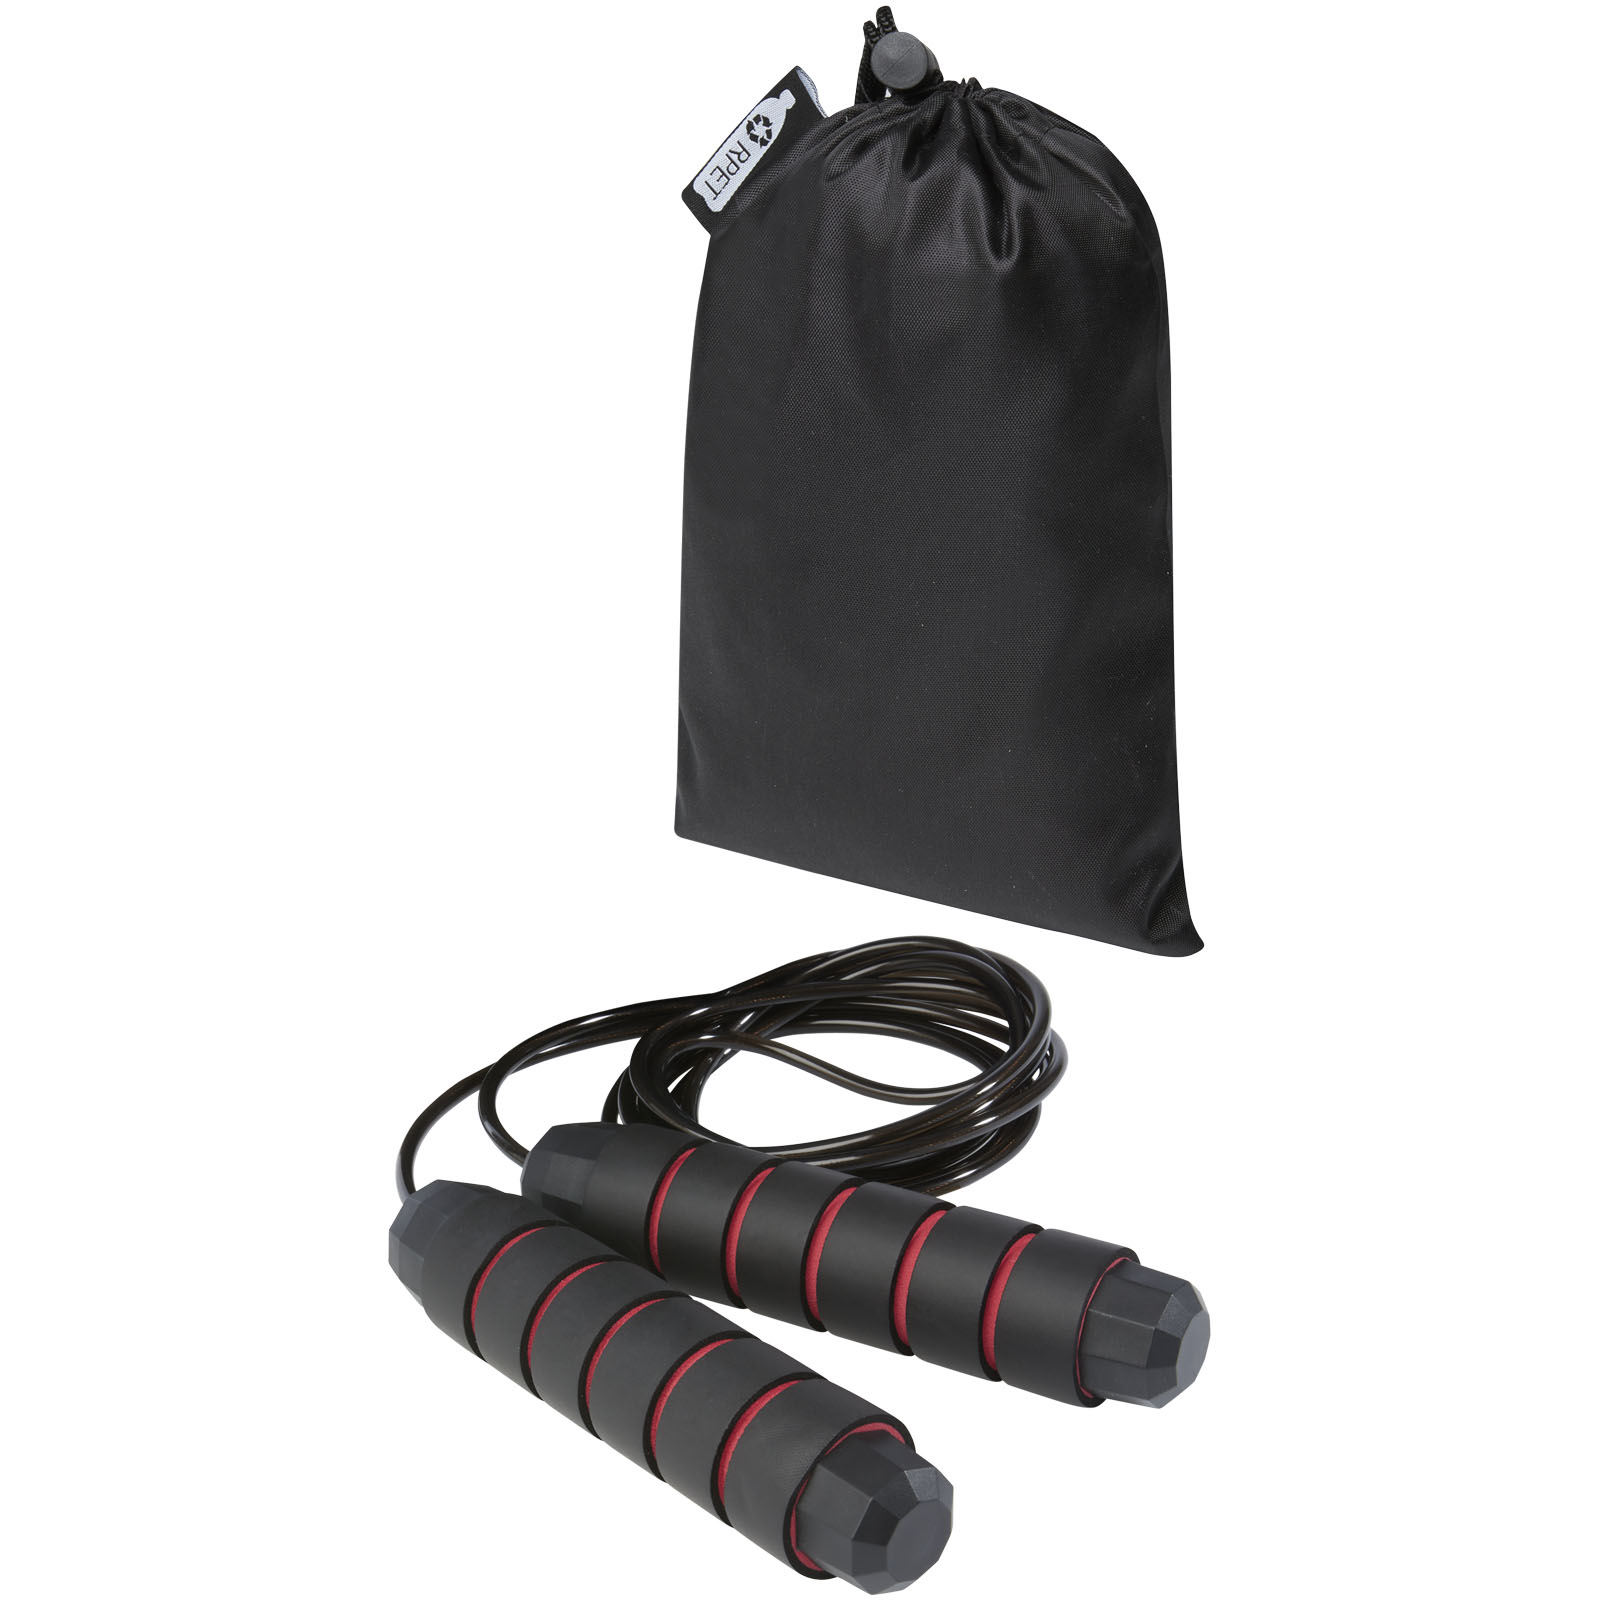 Advertising Fitness & Sport - Austin soft skipping rope in recycled PET pouch